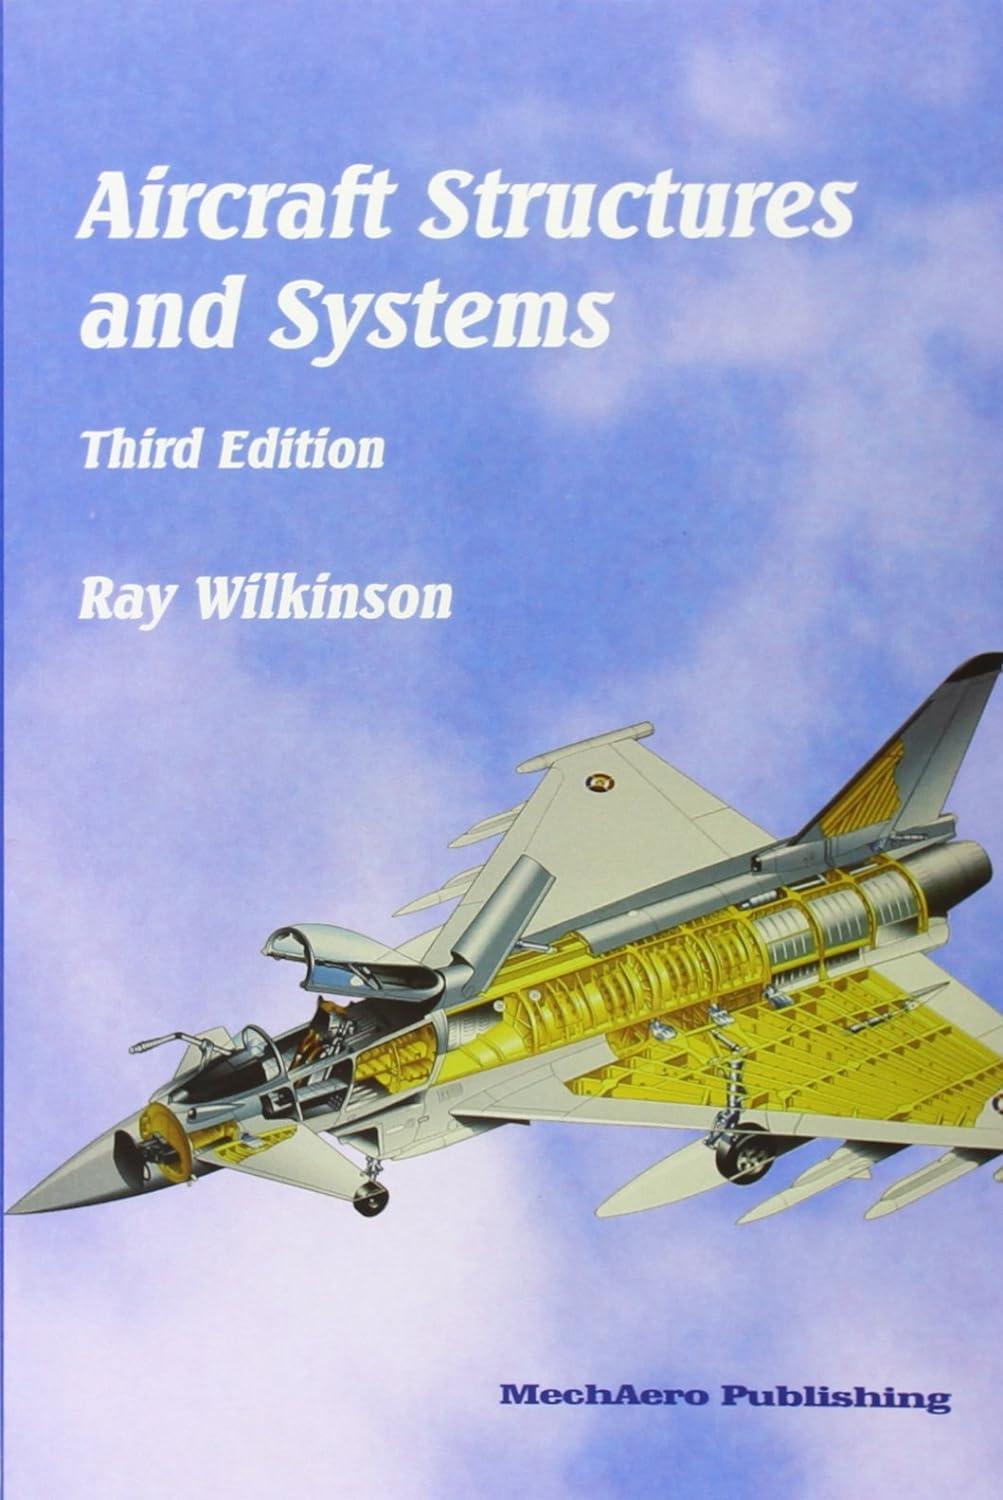 aircraft structures and systems 3rd edition ray wilkinson 0954073460, 978-0954073466